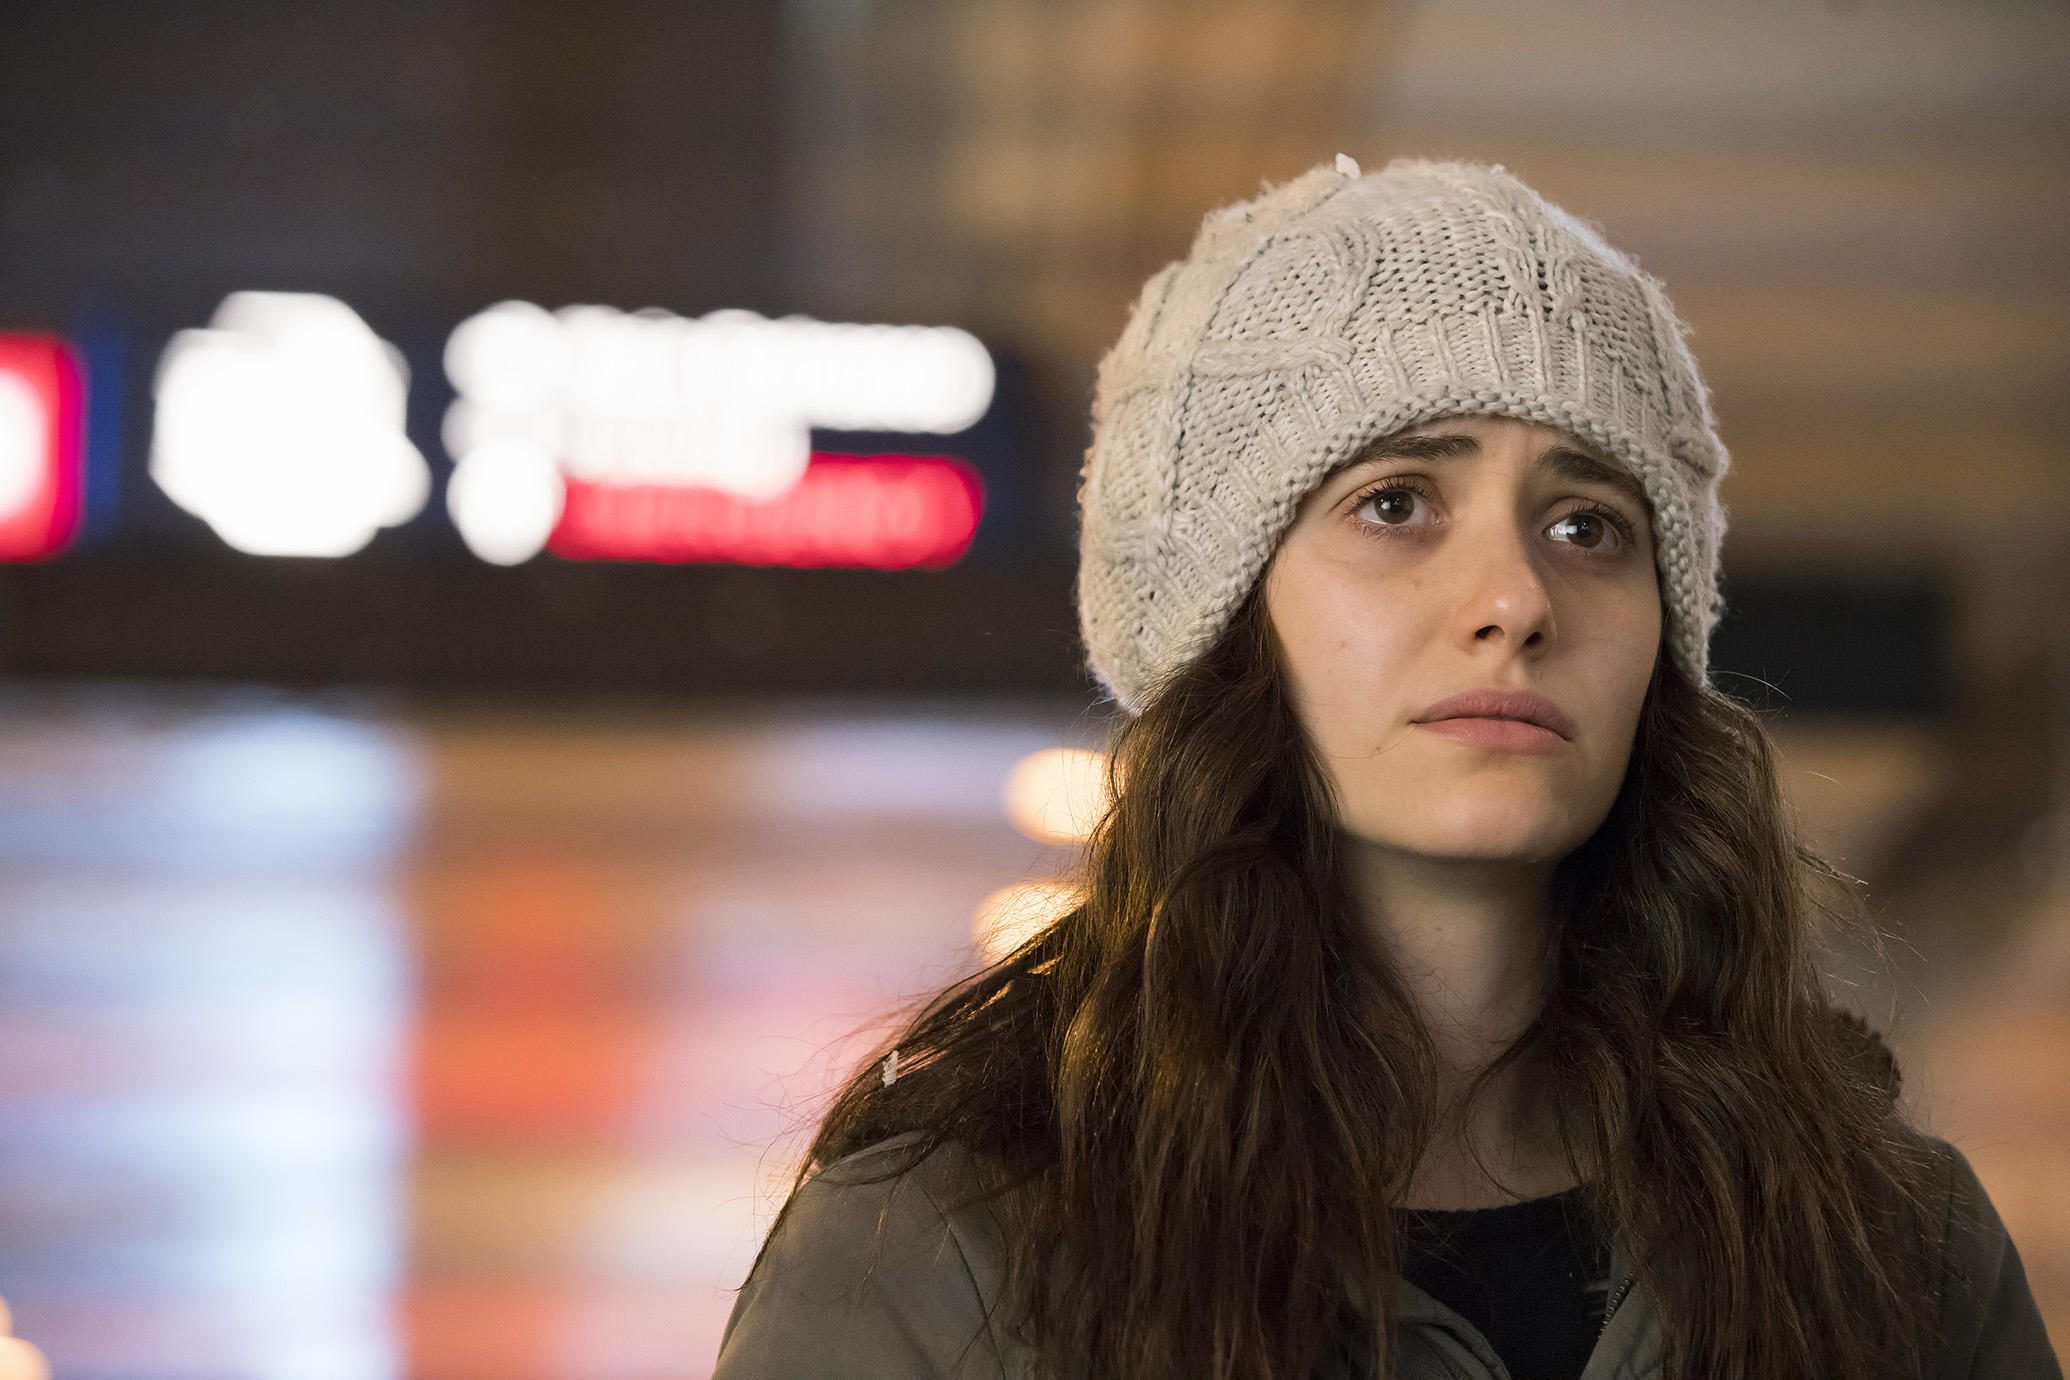 Emmy Rossum as Fiona in a scene from Shameless (Reproduction)